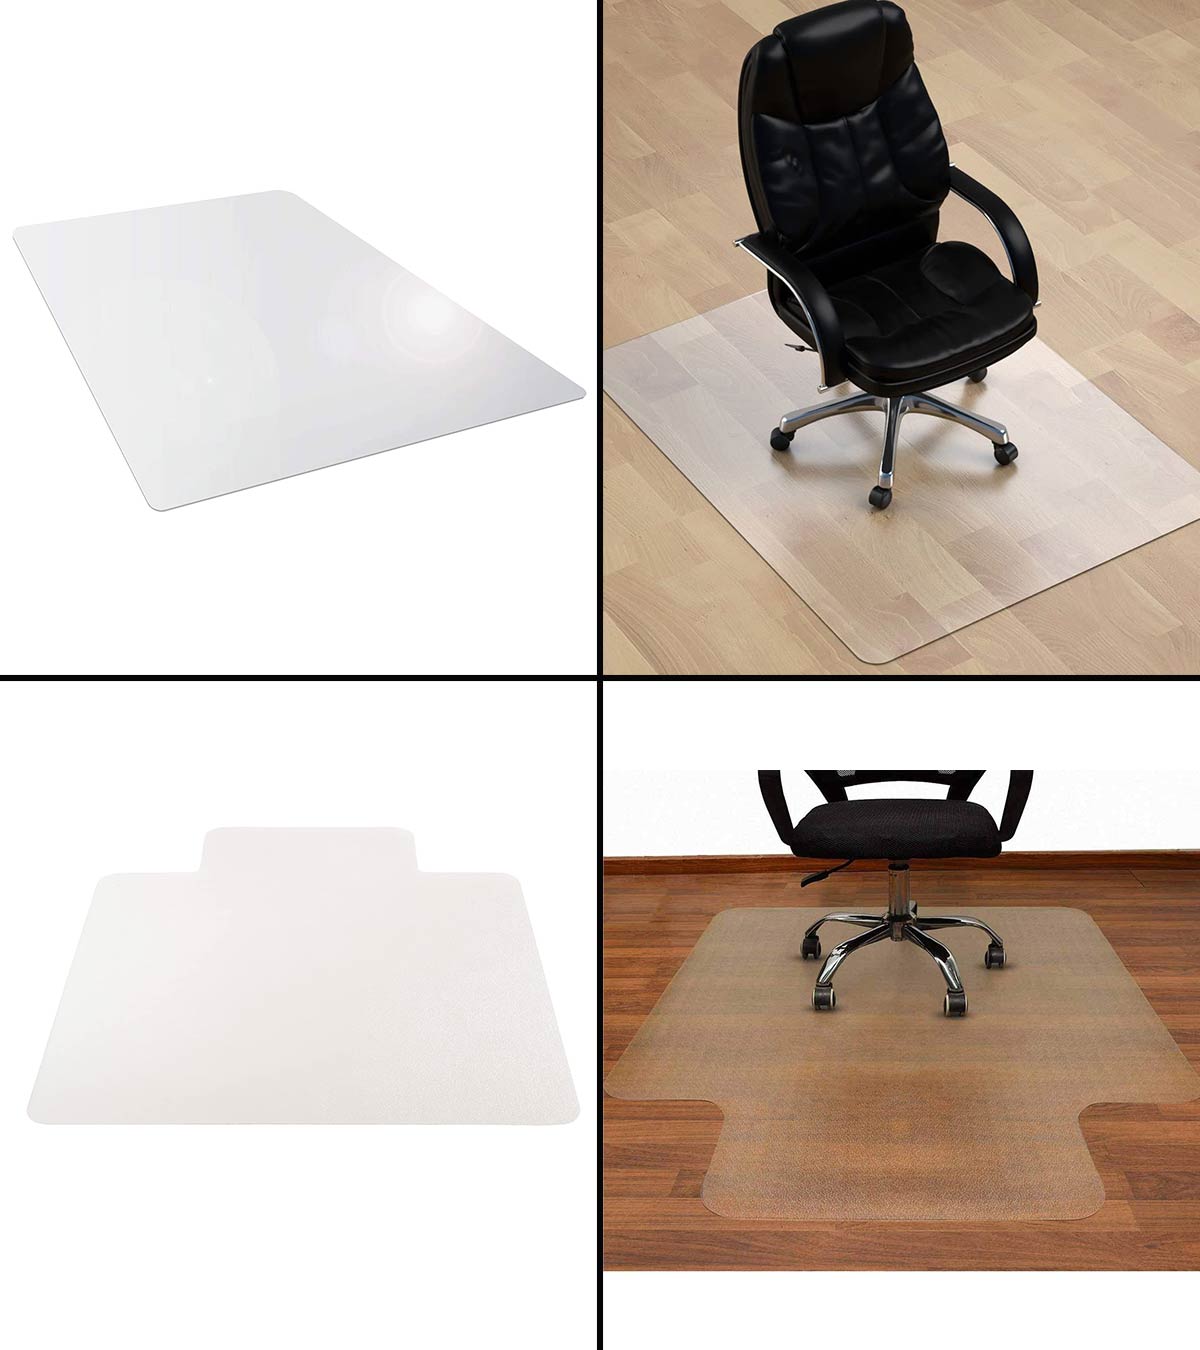 Eco Friendly 48 x 60" Thicken Unbreakable Chair Mat Protect Floor Anti-slip 